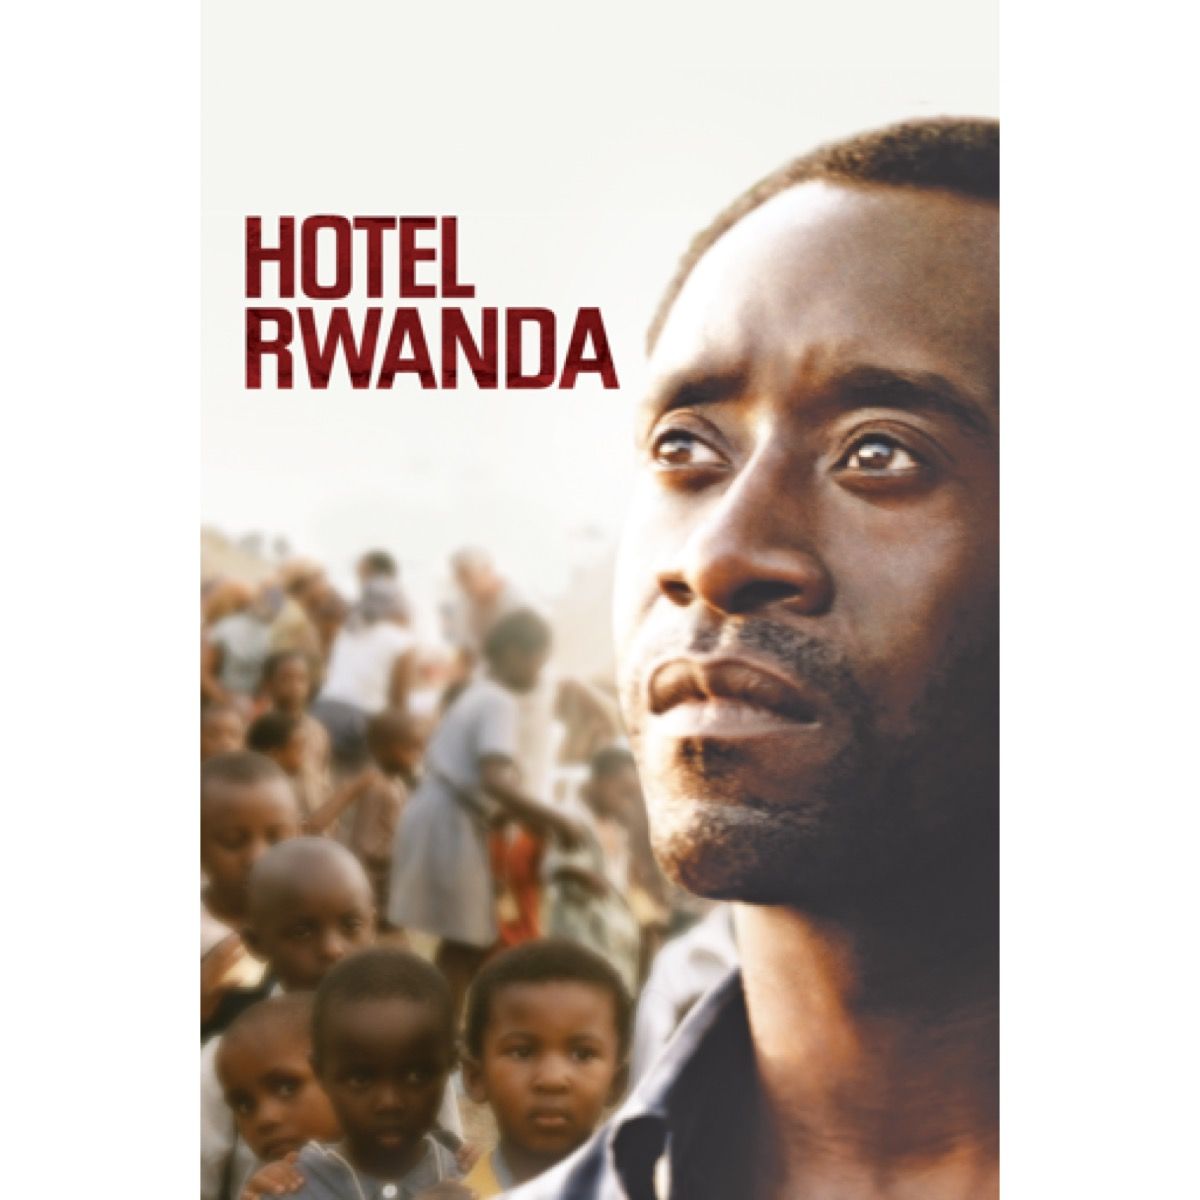 Hotel Rwanda 67% off $4.99 Nominated for 3 Oscars a drama in which paul Rusesabagina was a hotel manager who housed over a. Hotel rwanda, Hotel management, Hotel